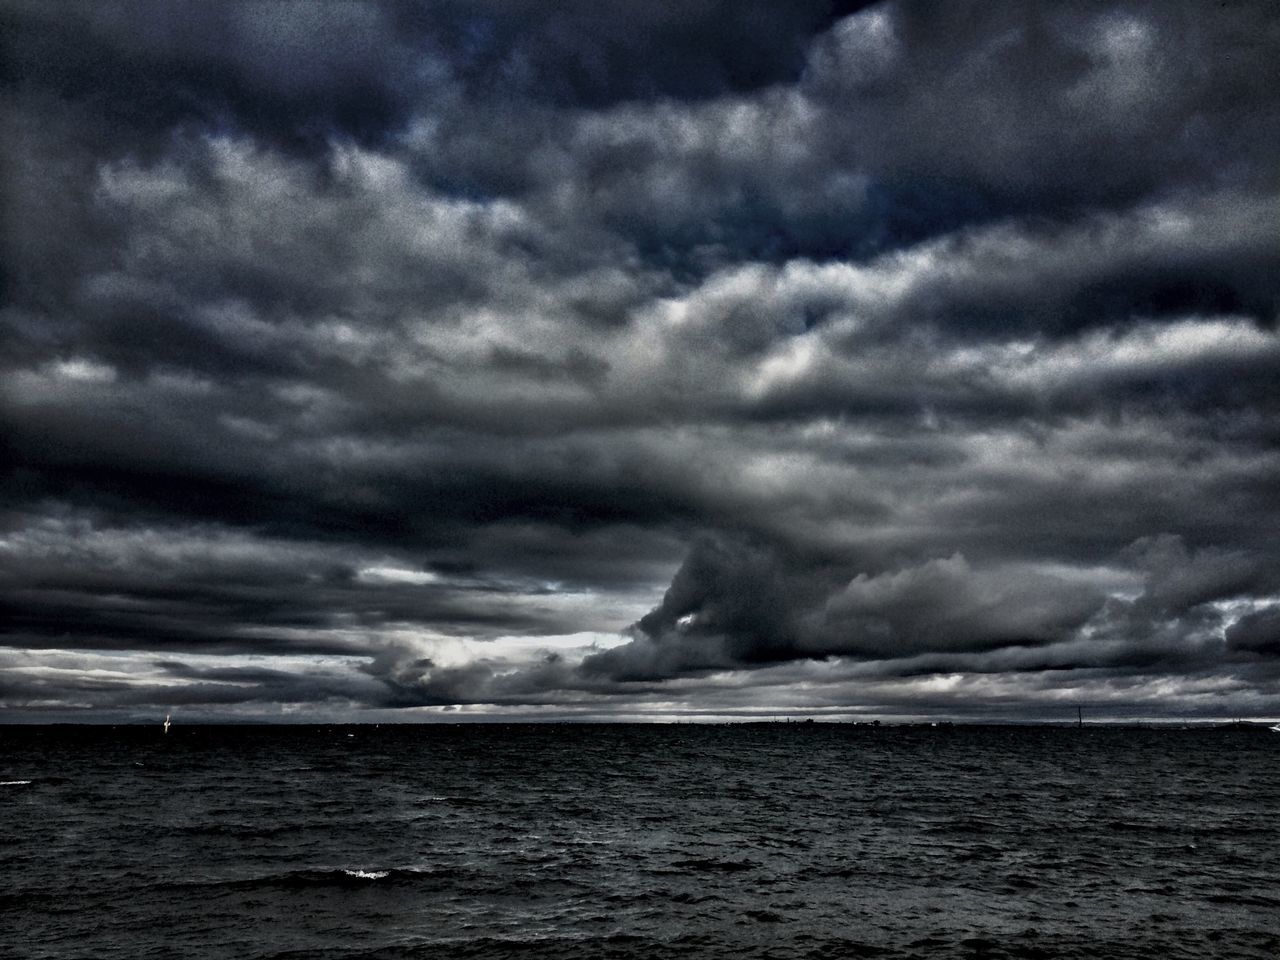 sea, sky, cloudy, water, cloud - sky, scenics, beauty in nature, tranquil scene, weather, tranquility, horizon over water, waterfront, storm cloud, overcast, nature, cloud, idyllic, dramatic sky, cloudscape, dusk